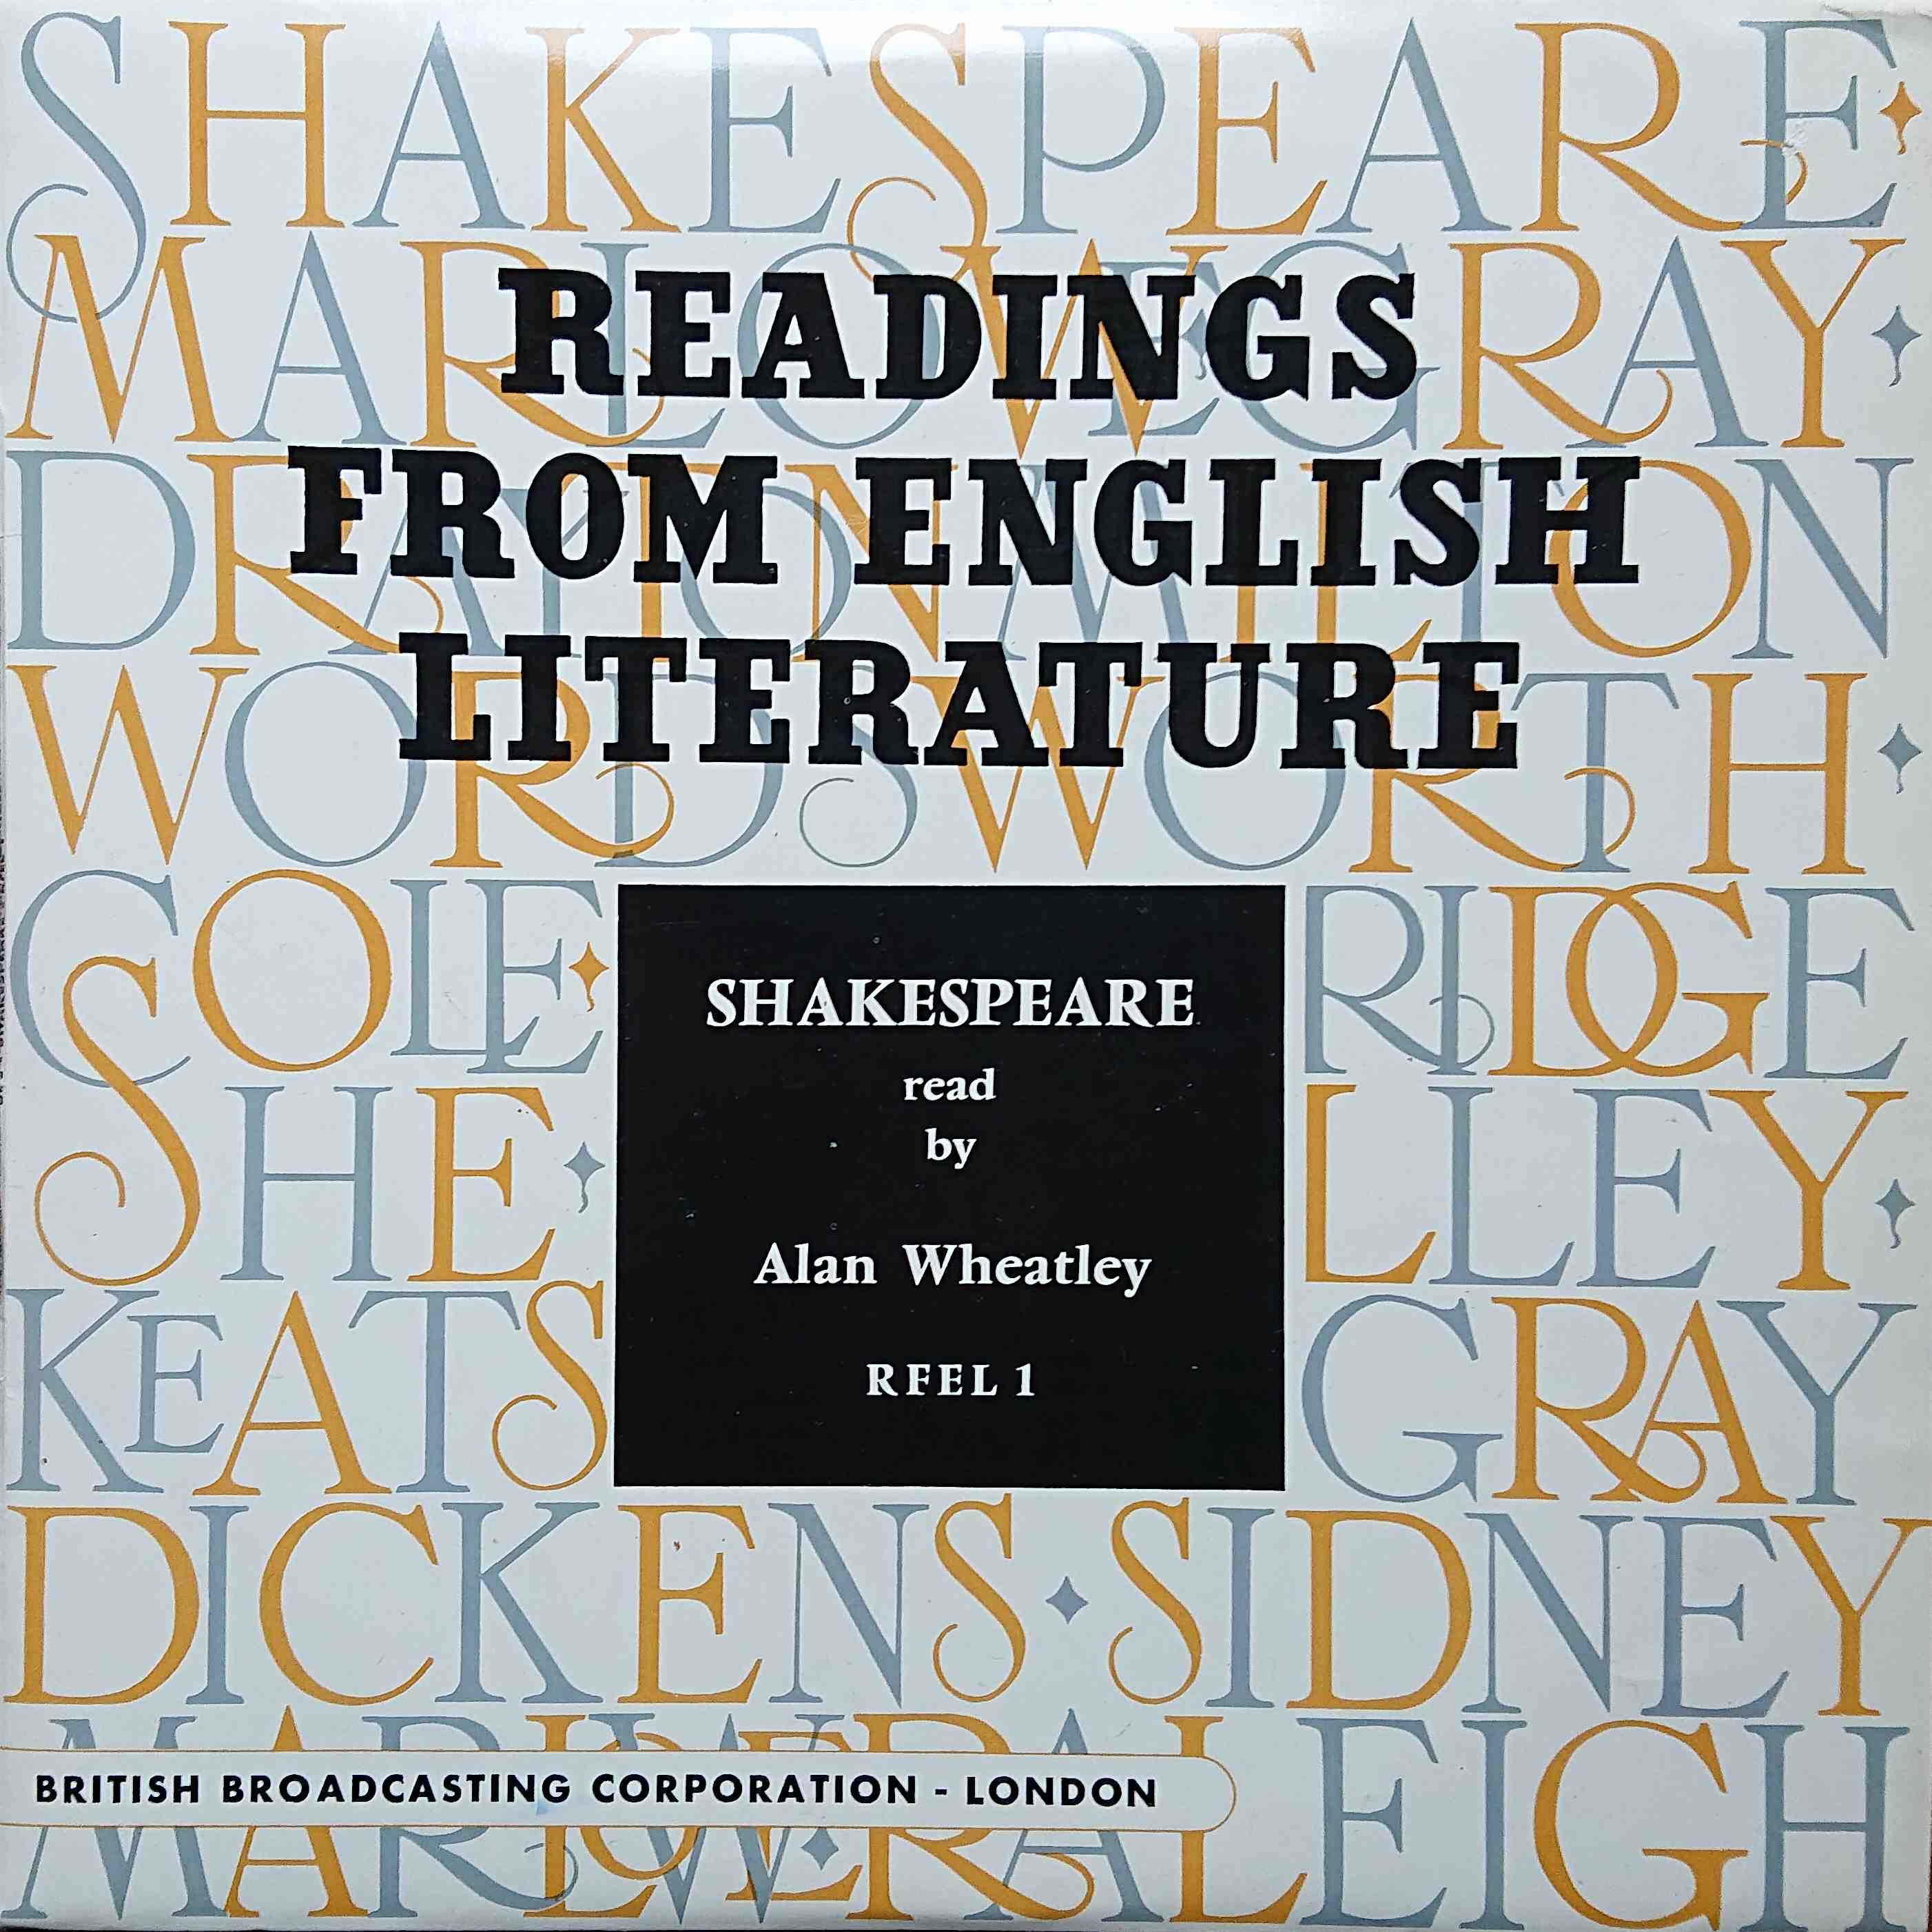 Picture of Shakespeare  by artist Alan Wheatley from the BBC 10inches - Records and Tapes library